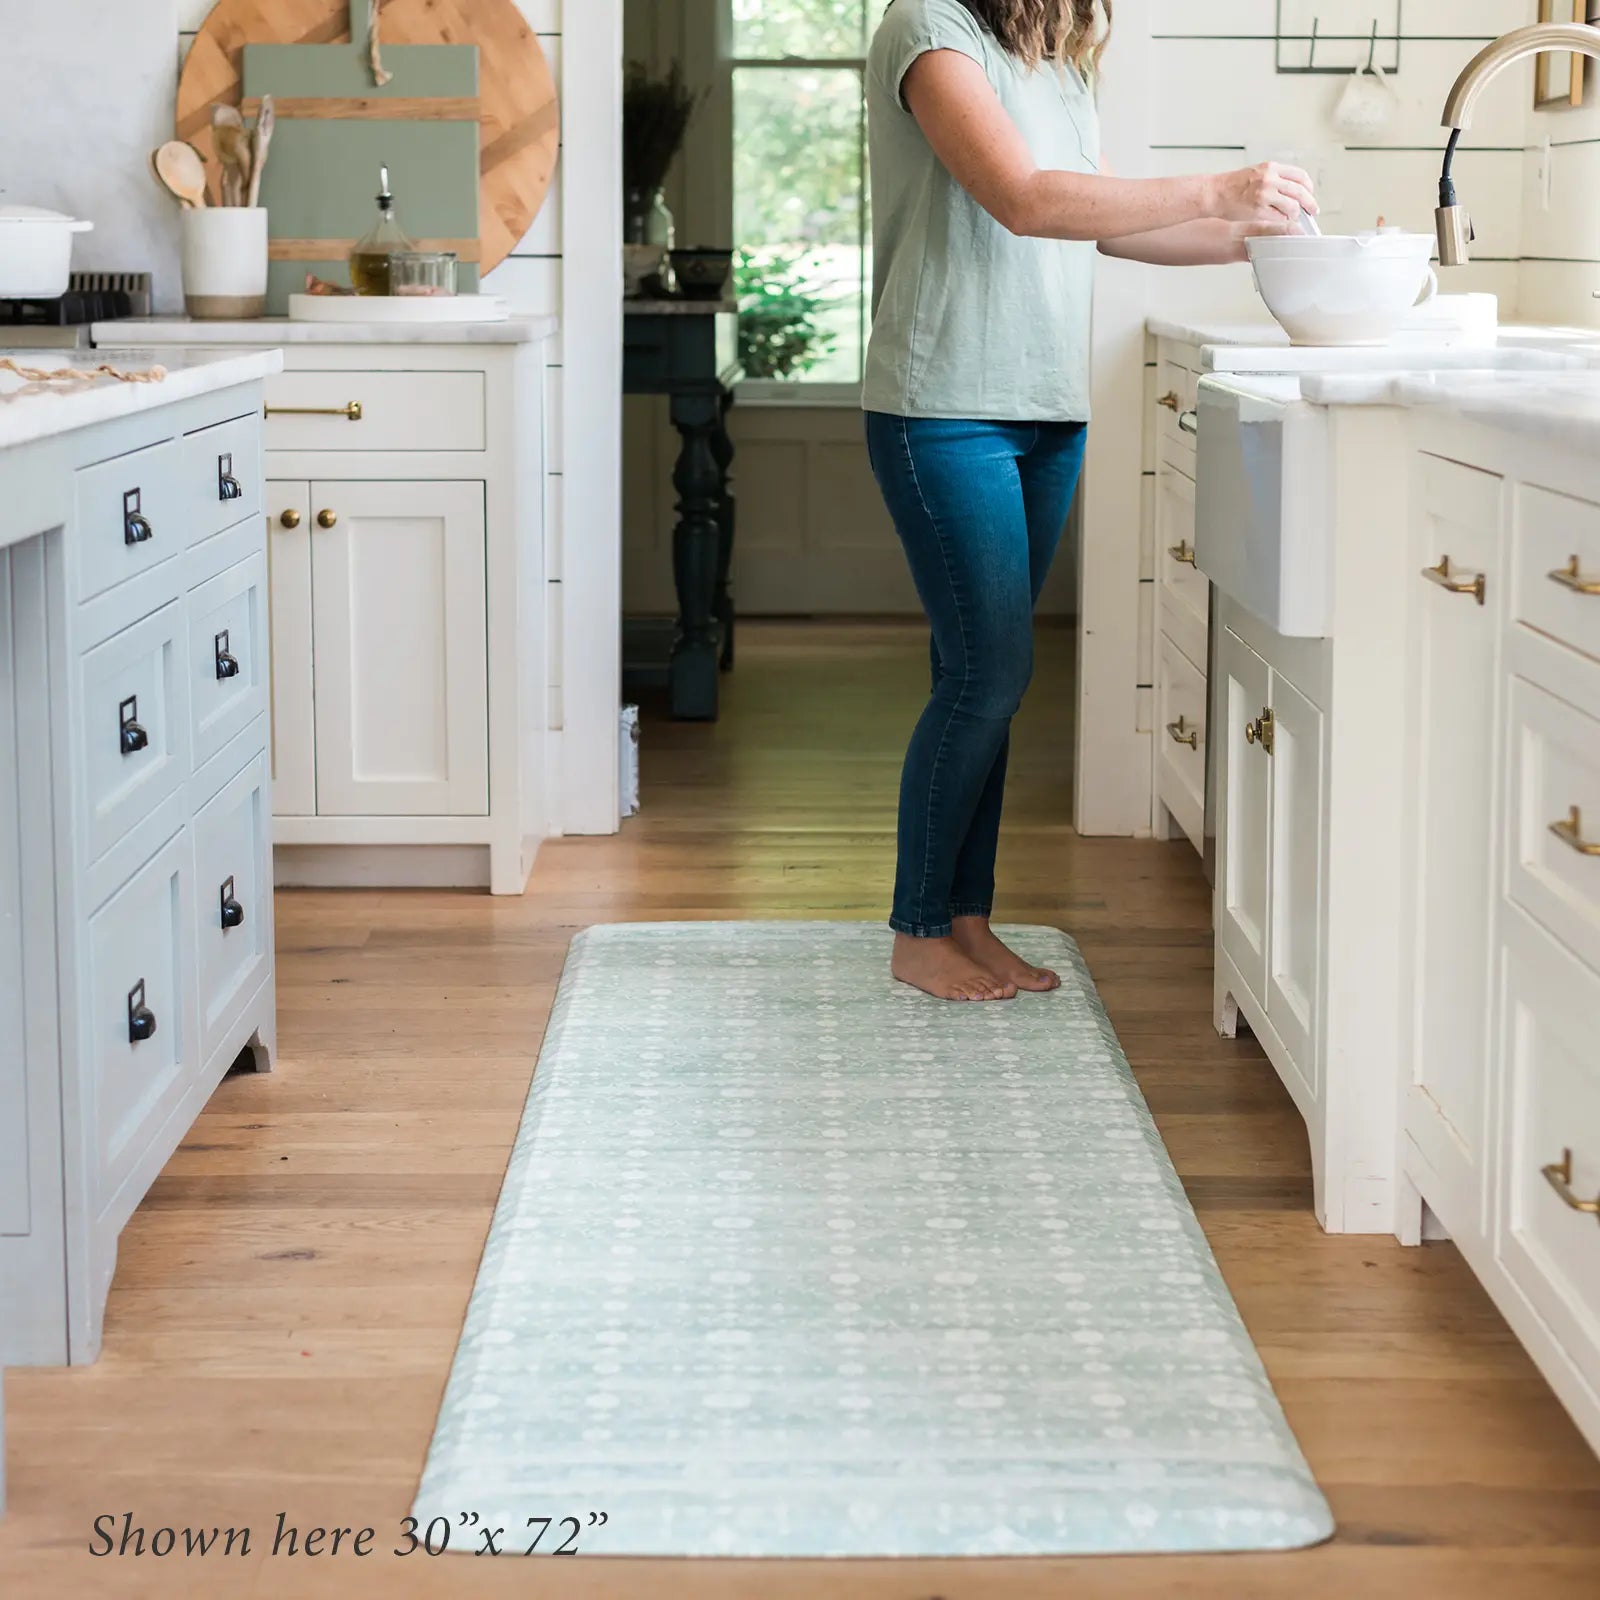 Nama standing mat Gemma white sage green floral in front of kitchen sink with woman shown in size size 30x72